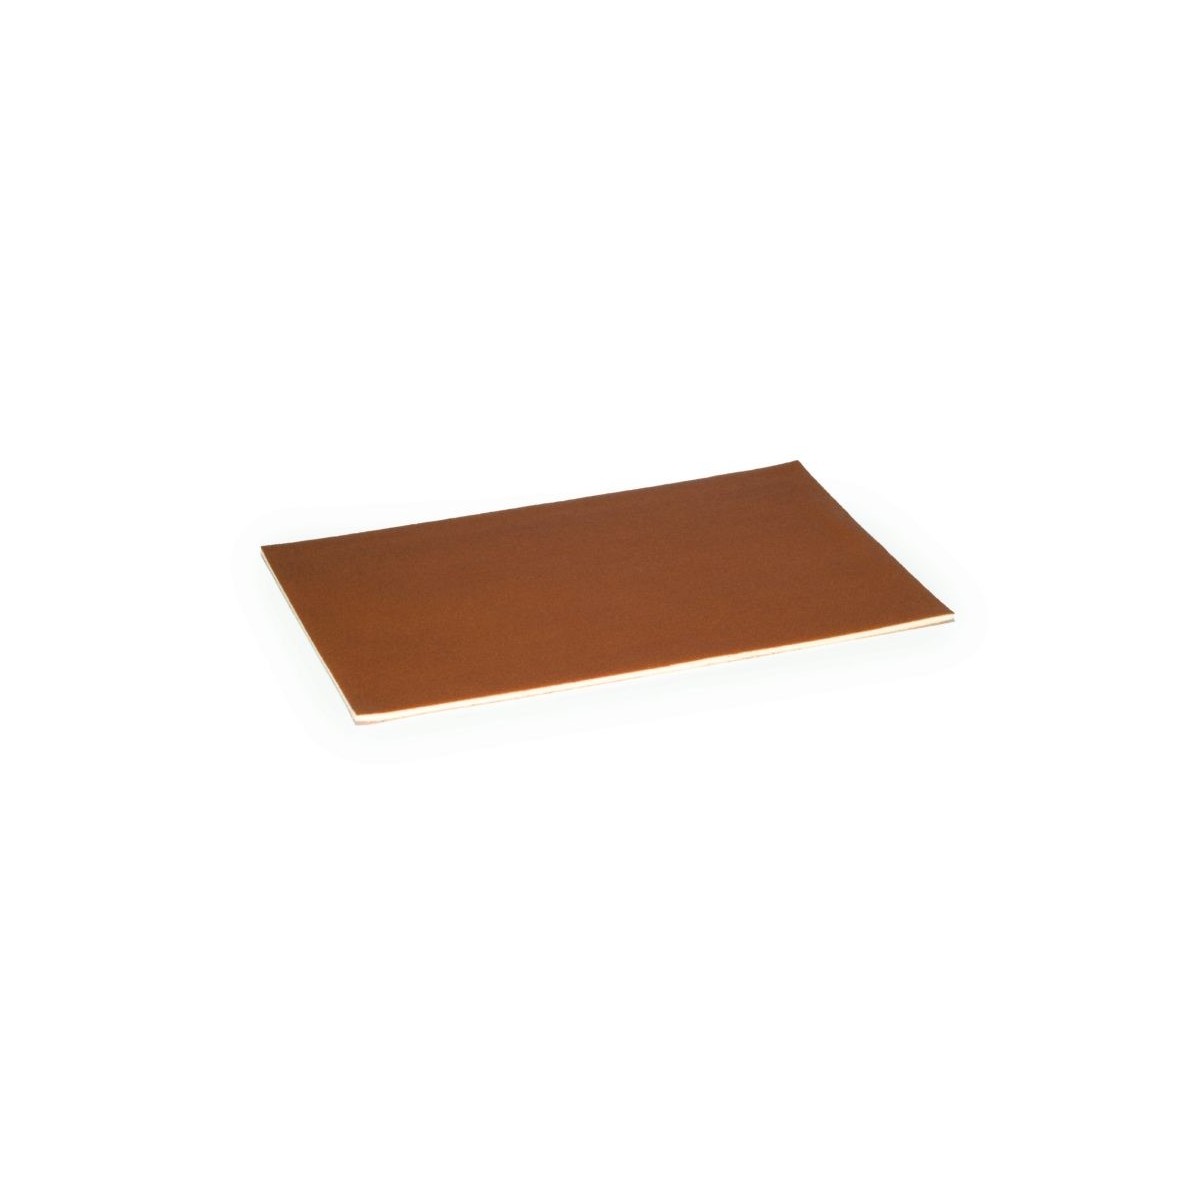 PIDY GENOISE CHOCOLATE 0.5CM 38X58CM 12 SHEETS  BOX ON/ORDER